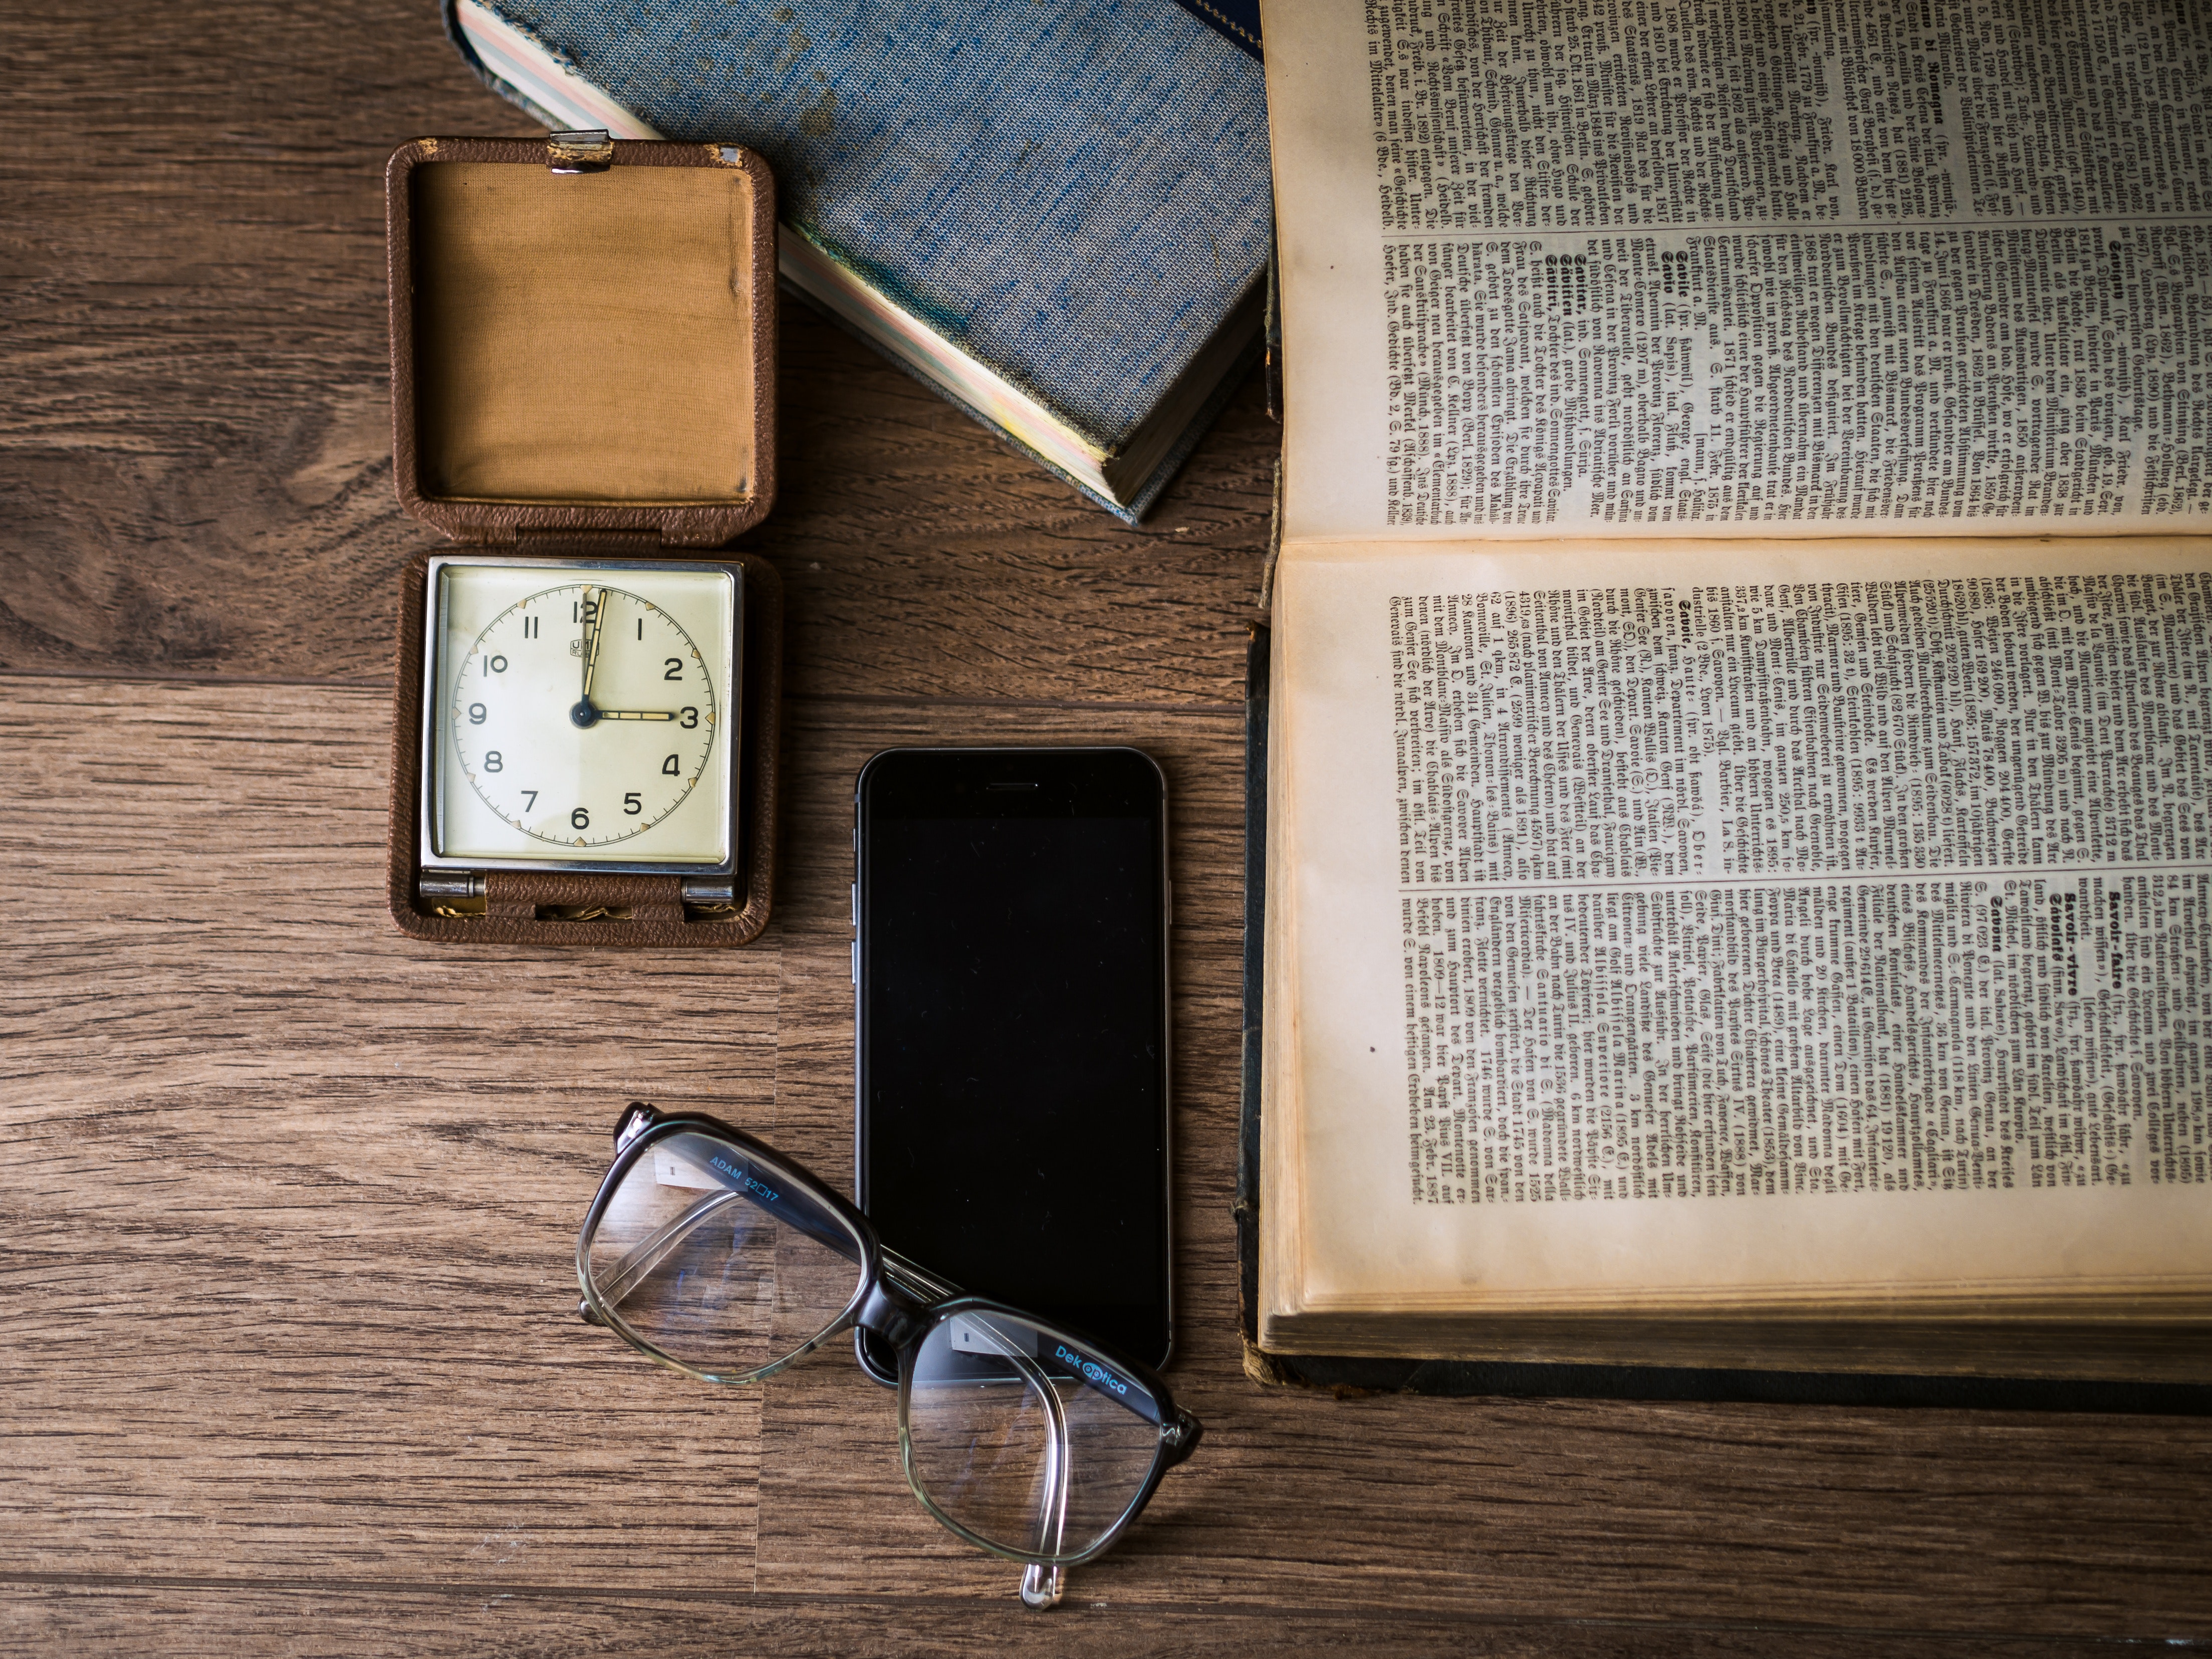 Black framed eyeglasses on top of black smartphone near brown square analog clock on brown wooden surface photo